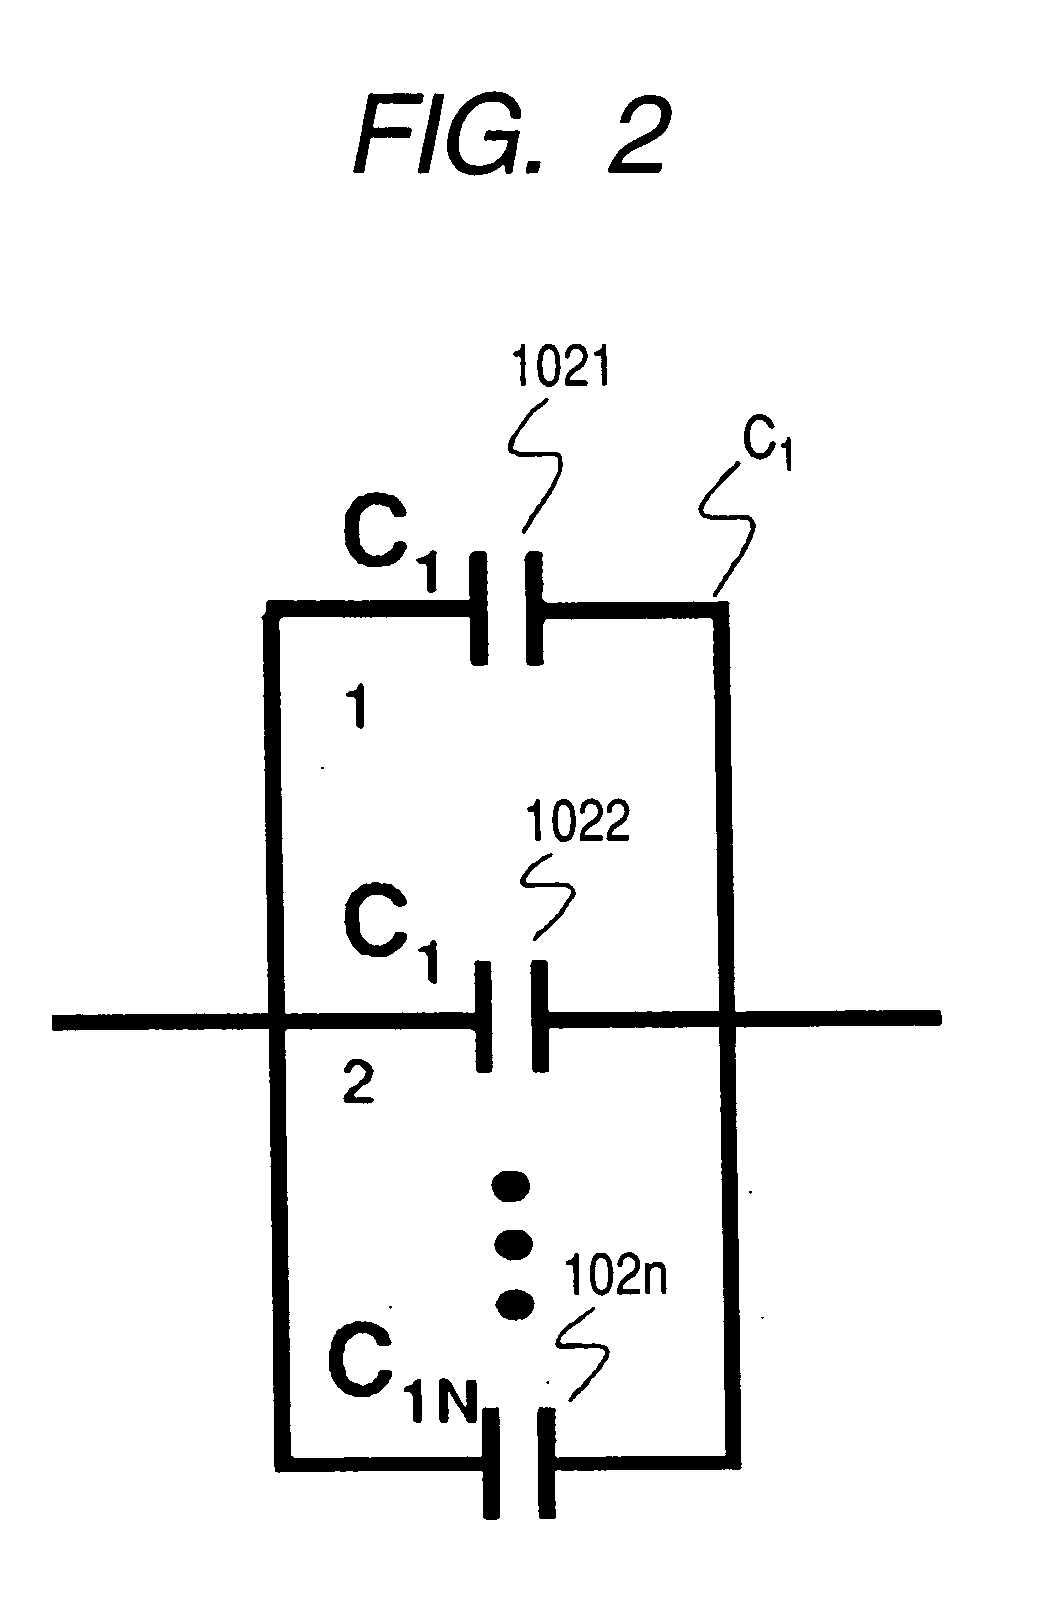 Analog-to-digital converter, method of controlling the same, and wireless transceiver circuit